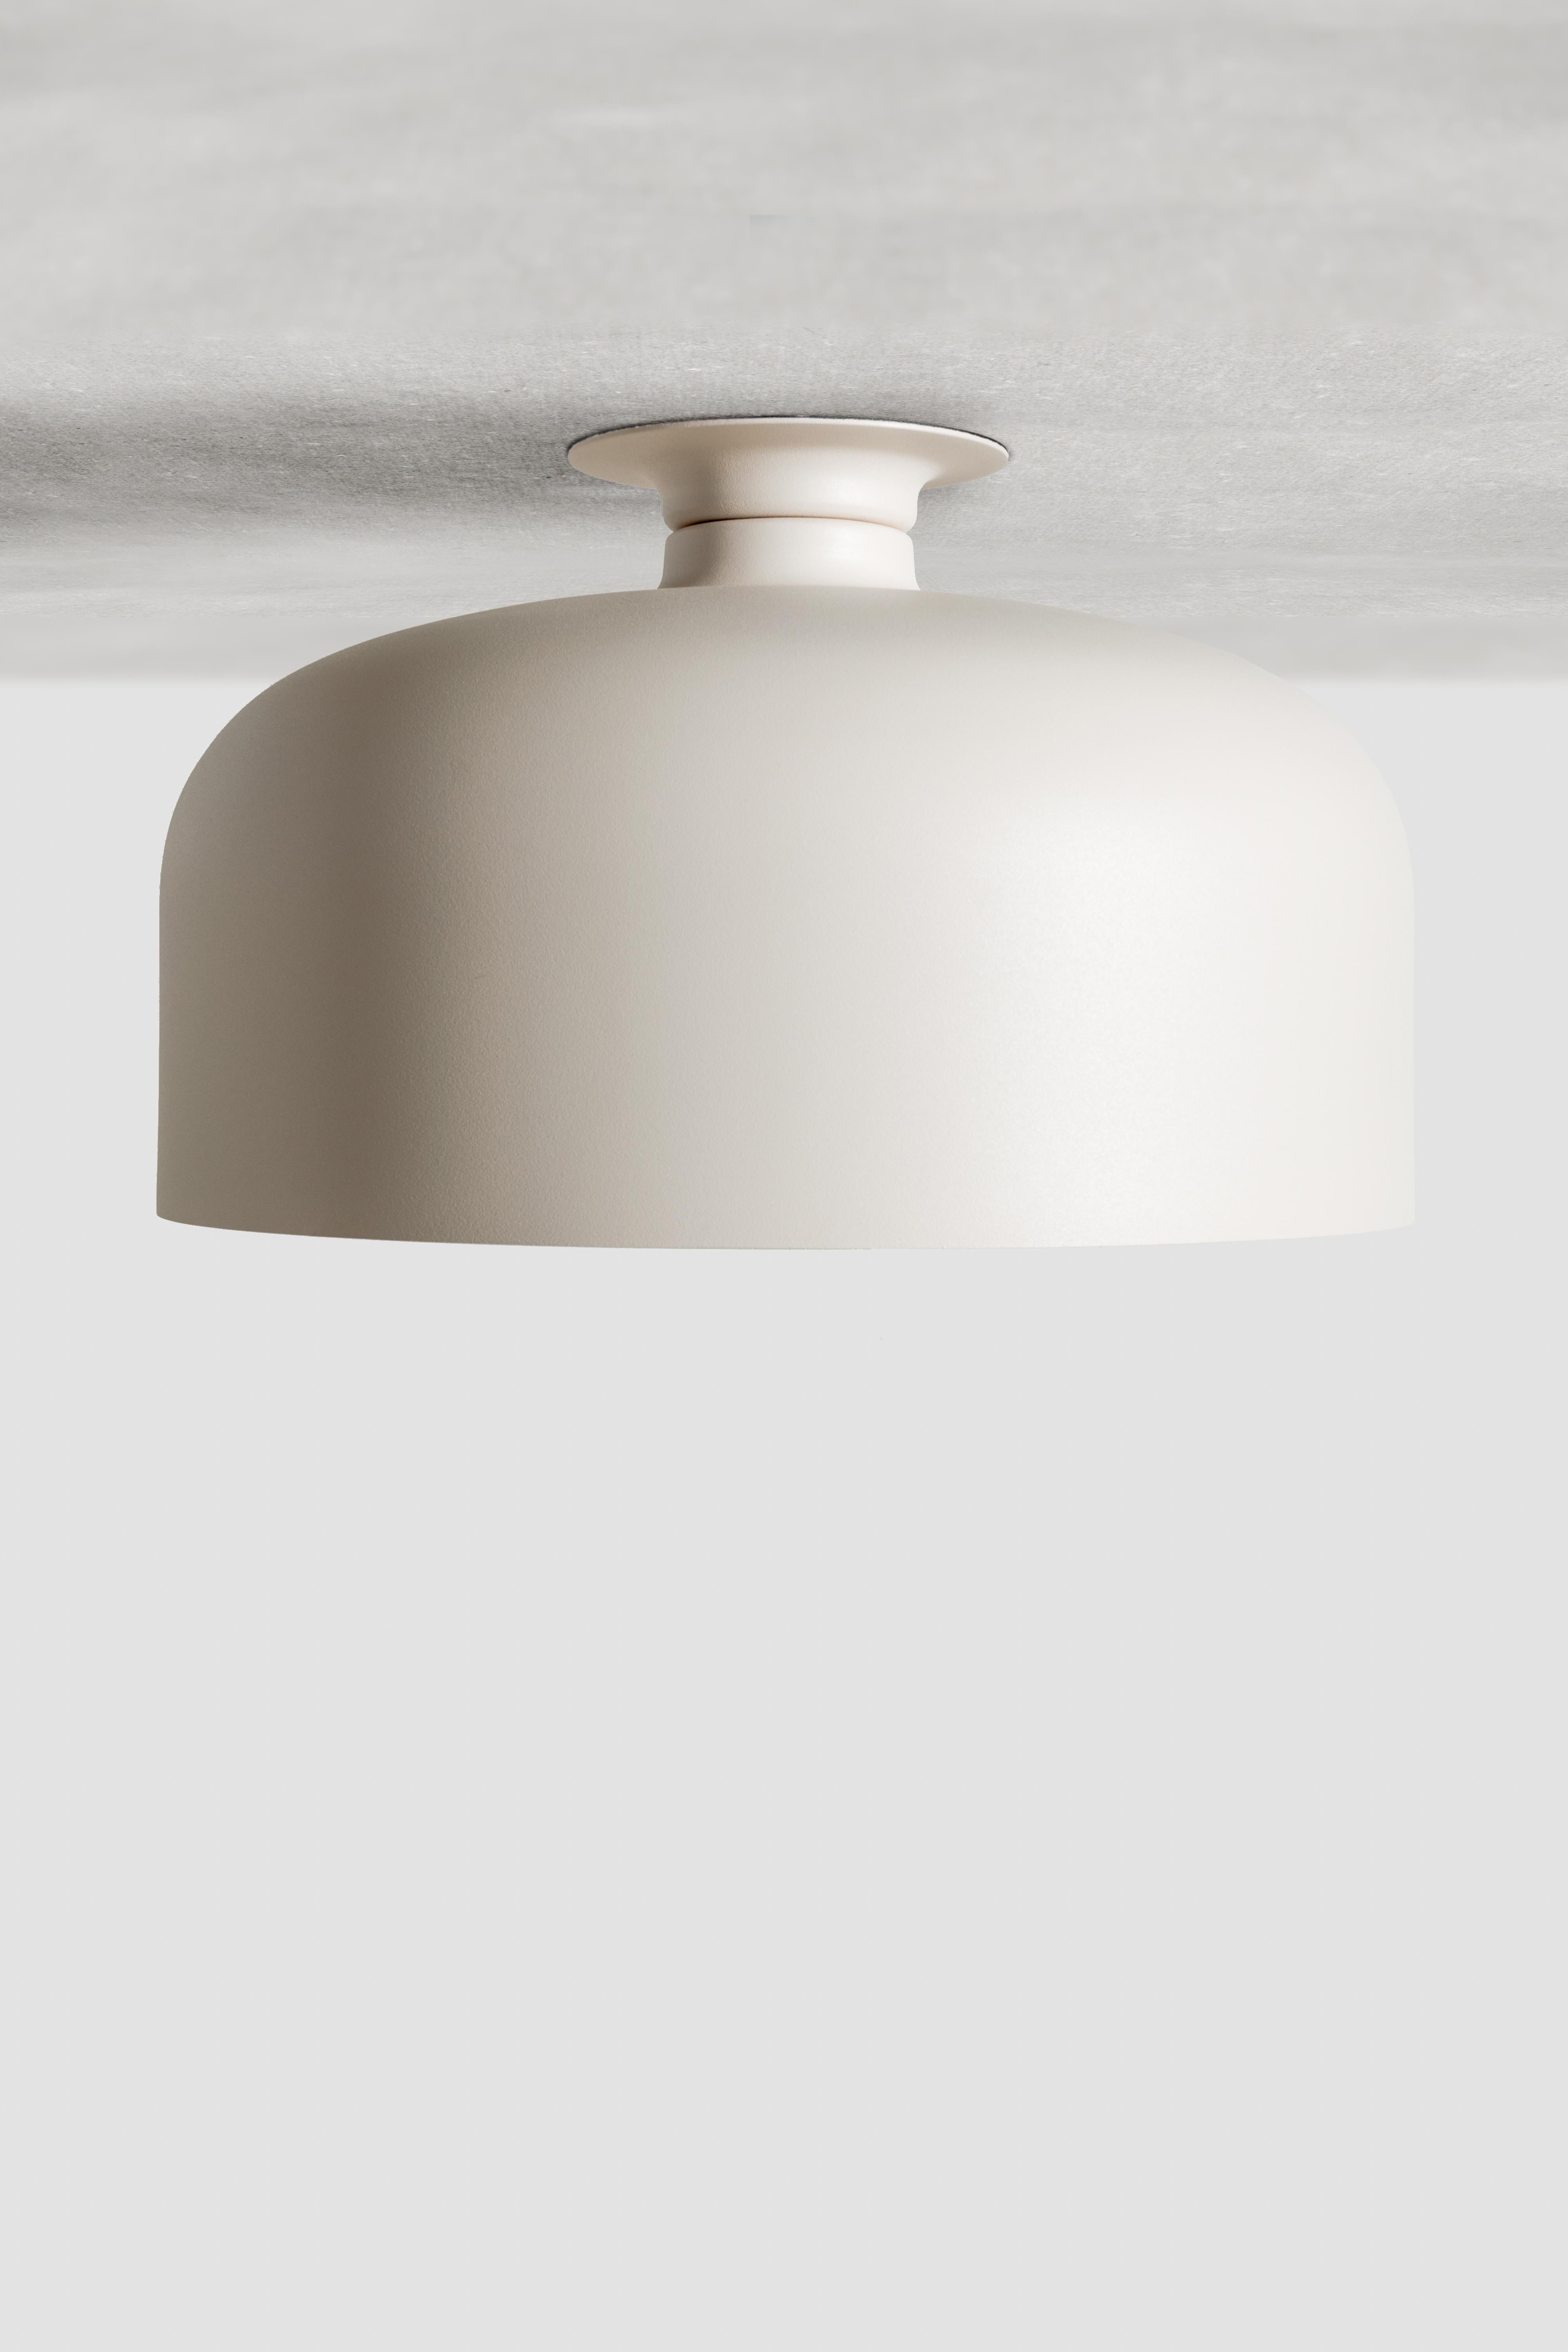 SPOTLIGHT VOLUMES, ceiling lamp / wall lamp
Design: Lukas Peet, Editor: ANDLight
UL Listed

Model shown: B

Inspired by spotlights, the Spotlight Volumes series is based on four unique shade profiles which combine in various ways. While designed